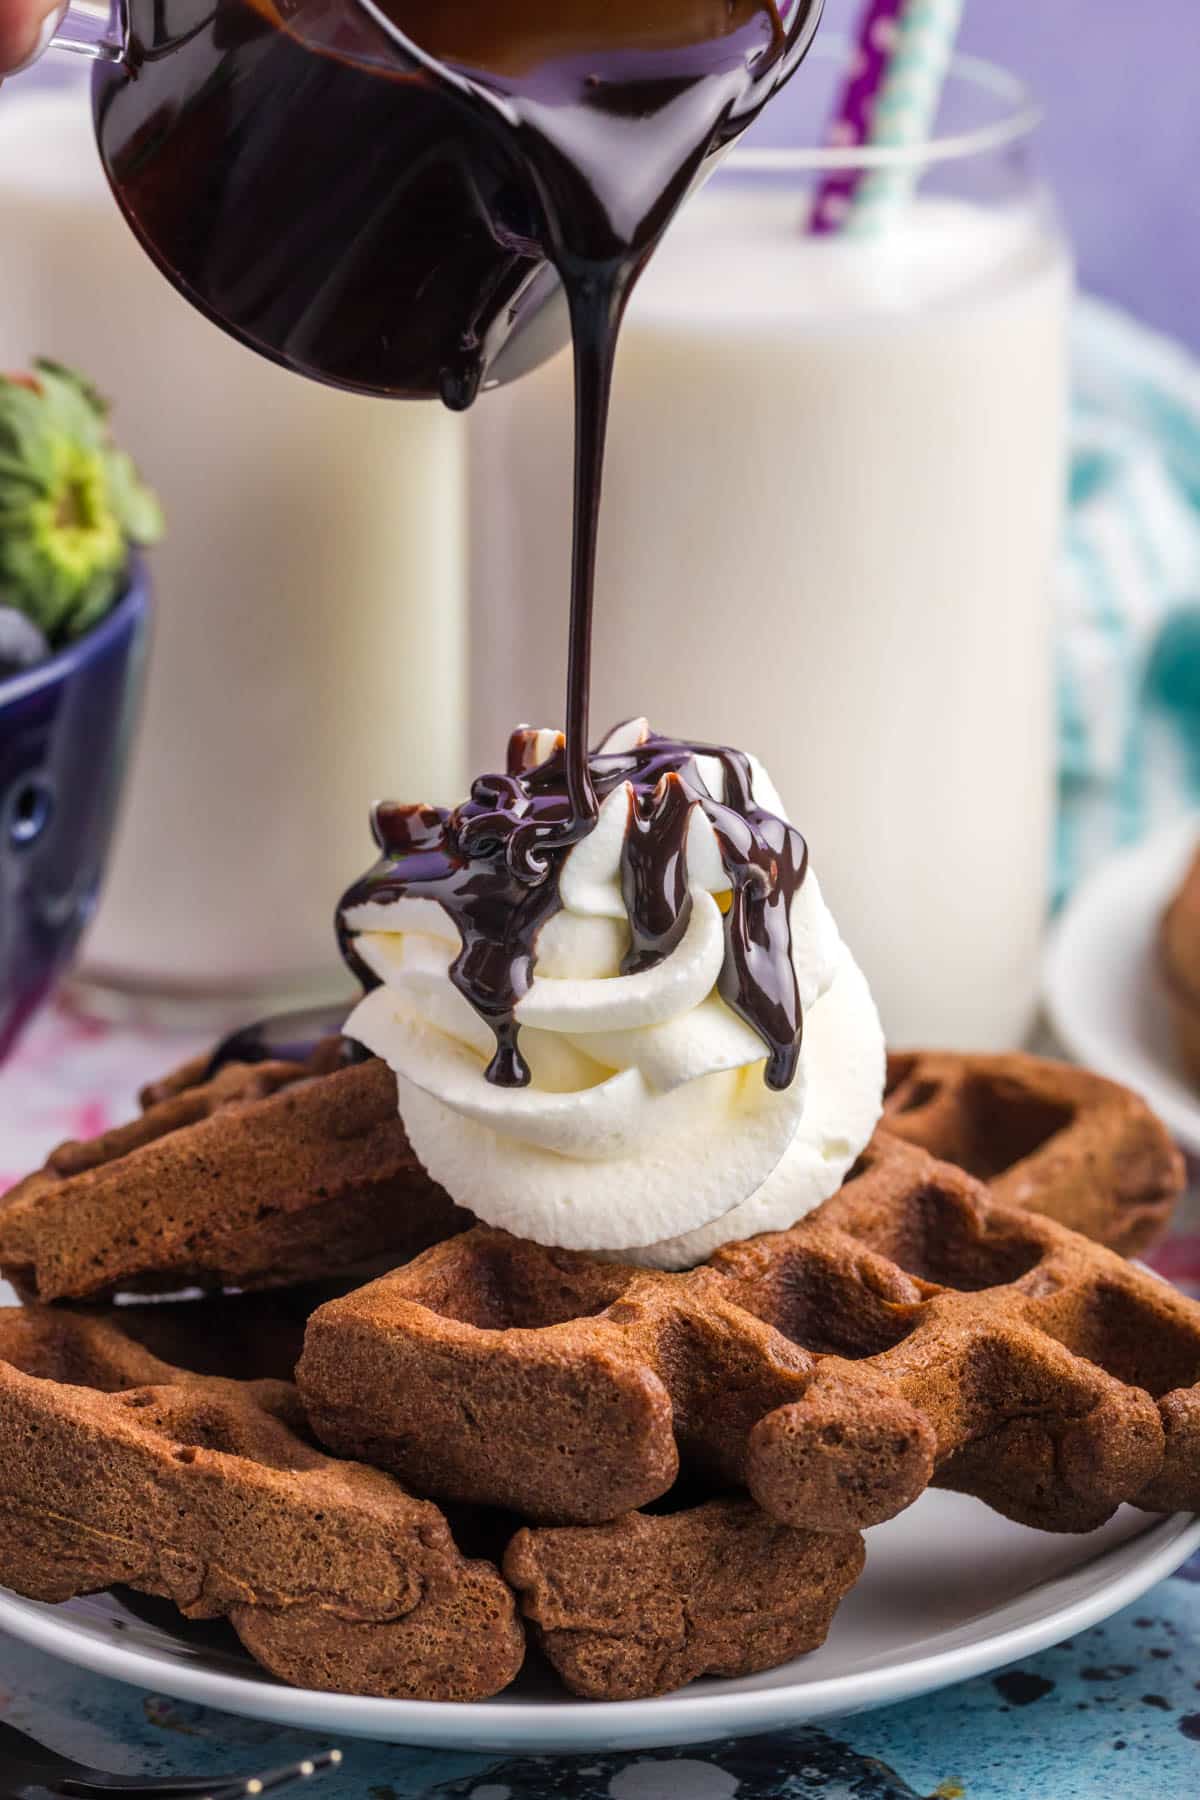 chocolate syrup pouring over chocolate waffles with whipped cream